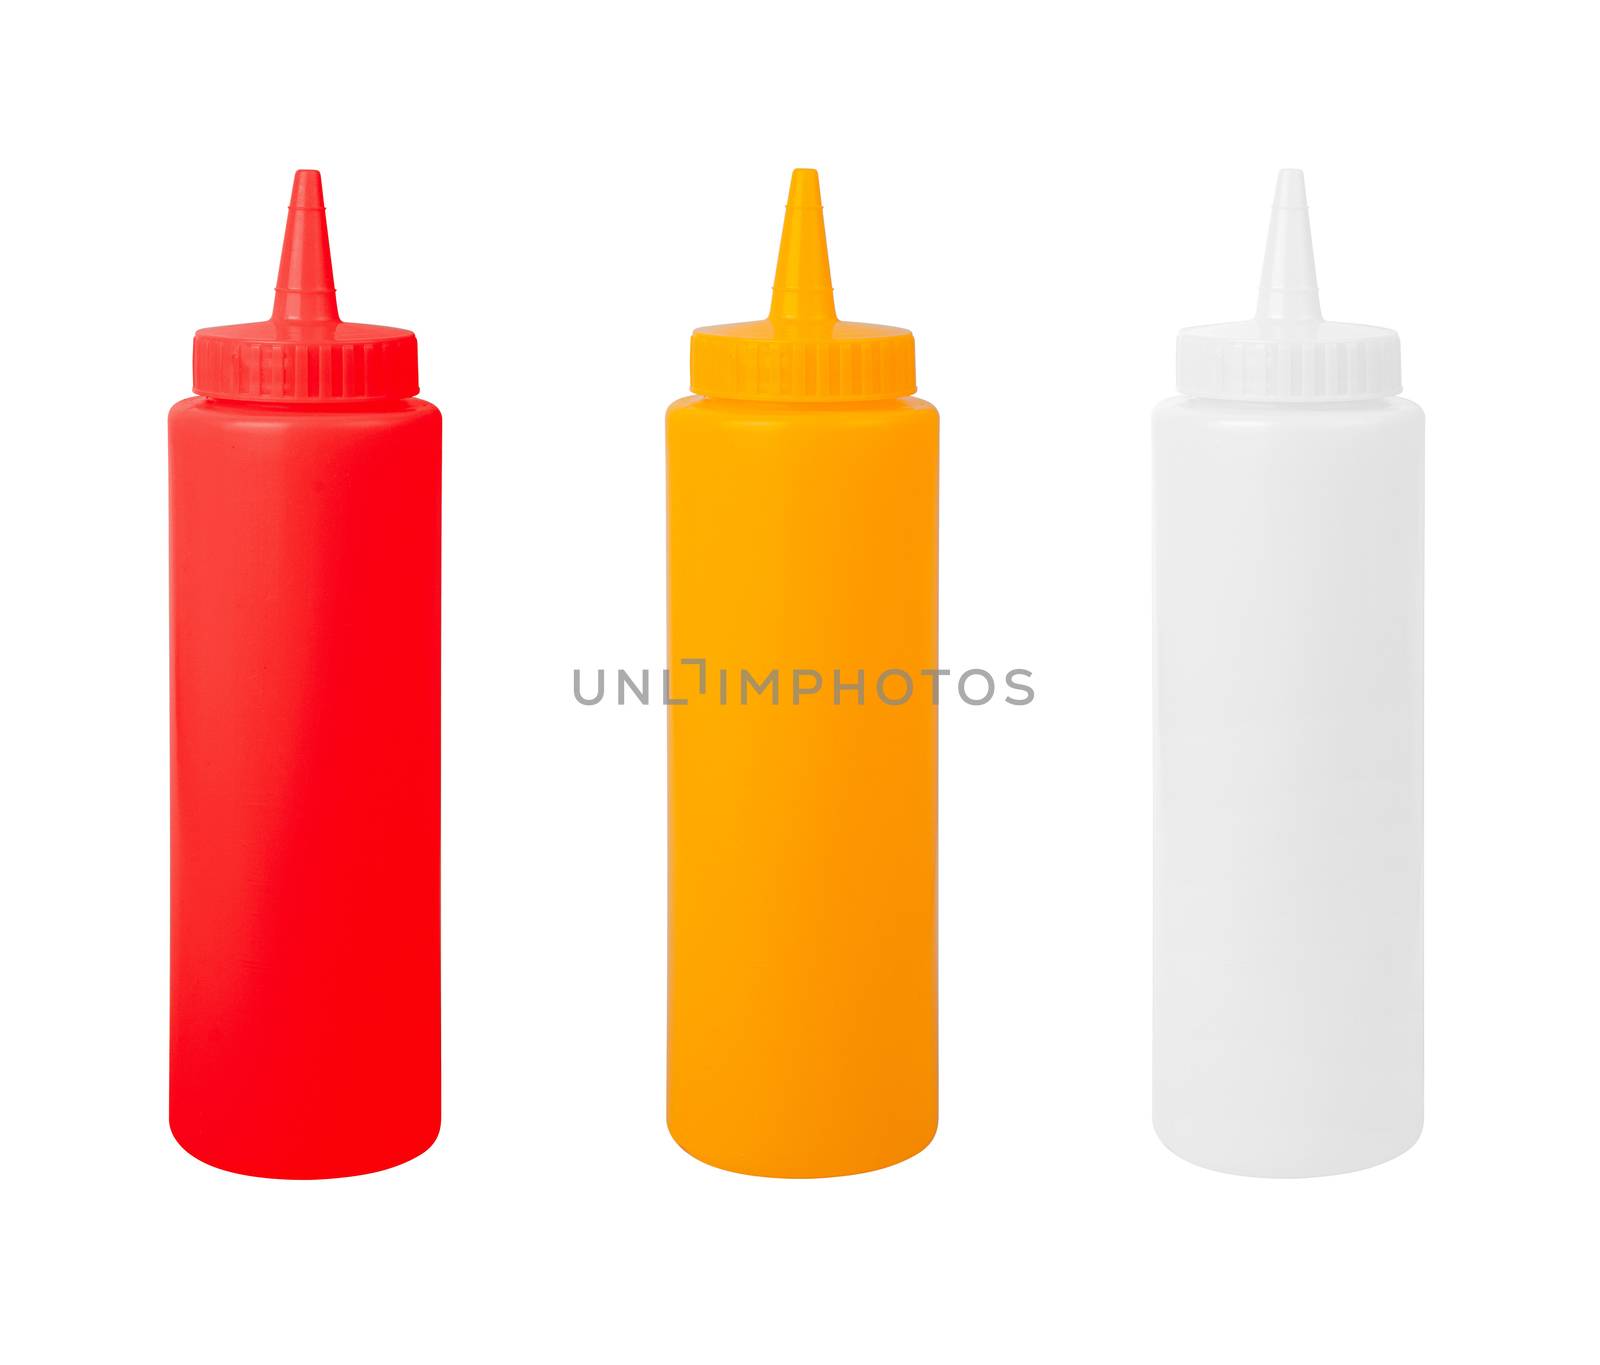 ketchup, mustard and blank bottle on a white background